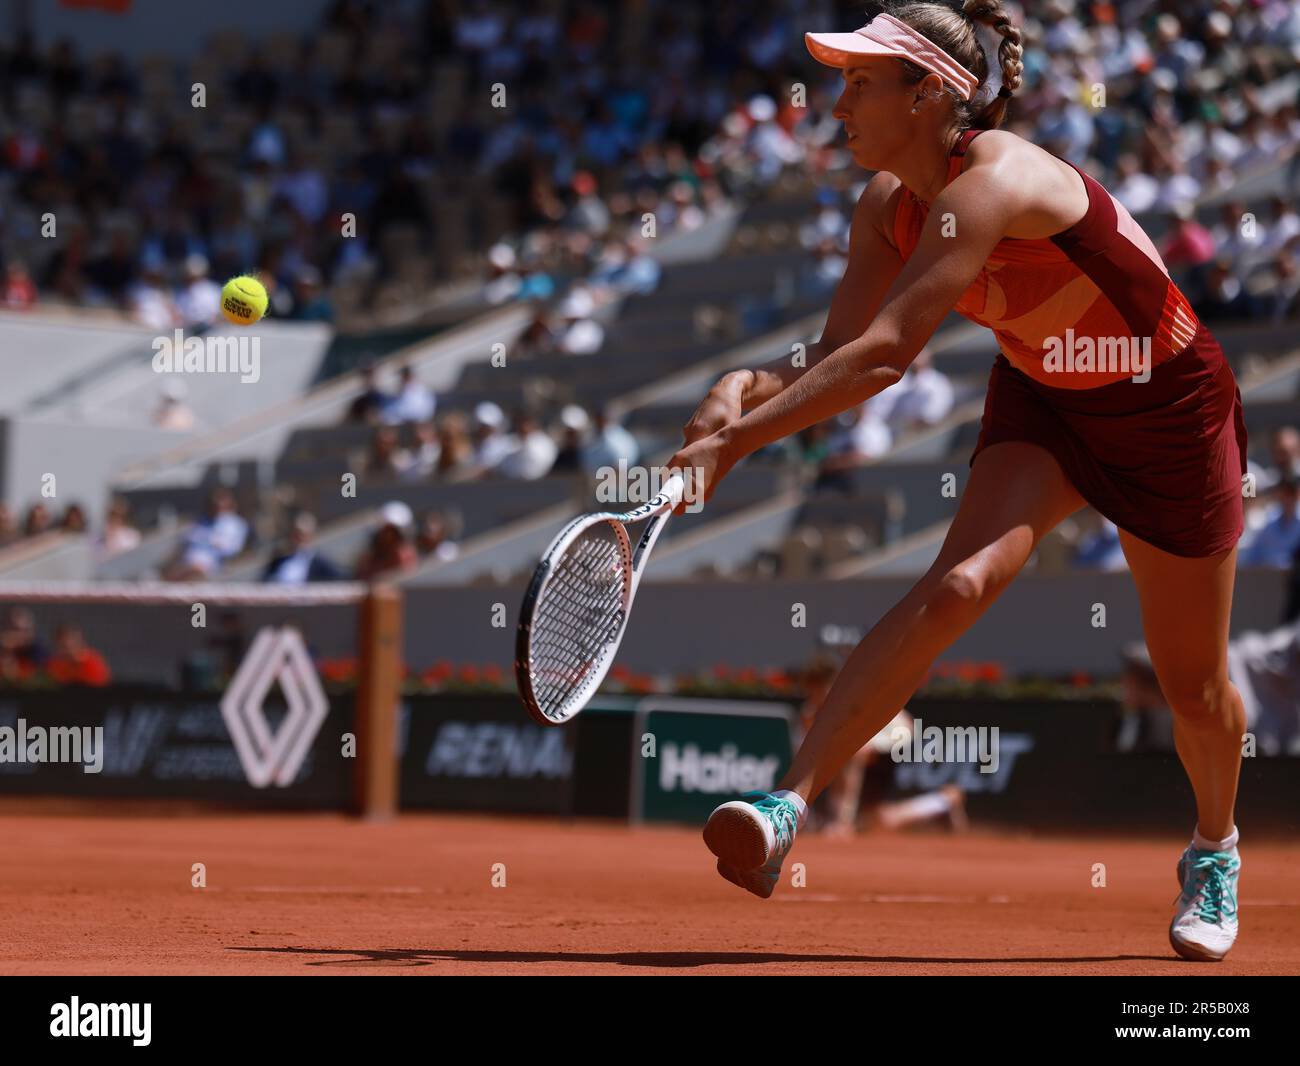 Paris, France. 2nd June, 2023. Elise Mertens of Belgium hits a return  during the women's singles third round match against Jessica Pegula of the  United States at the French Open tennis tournament